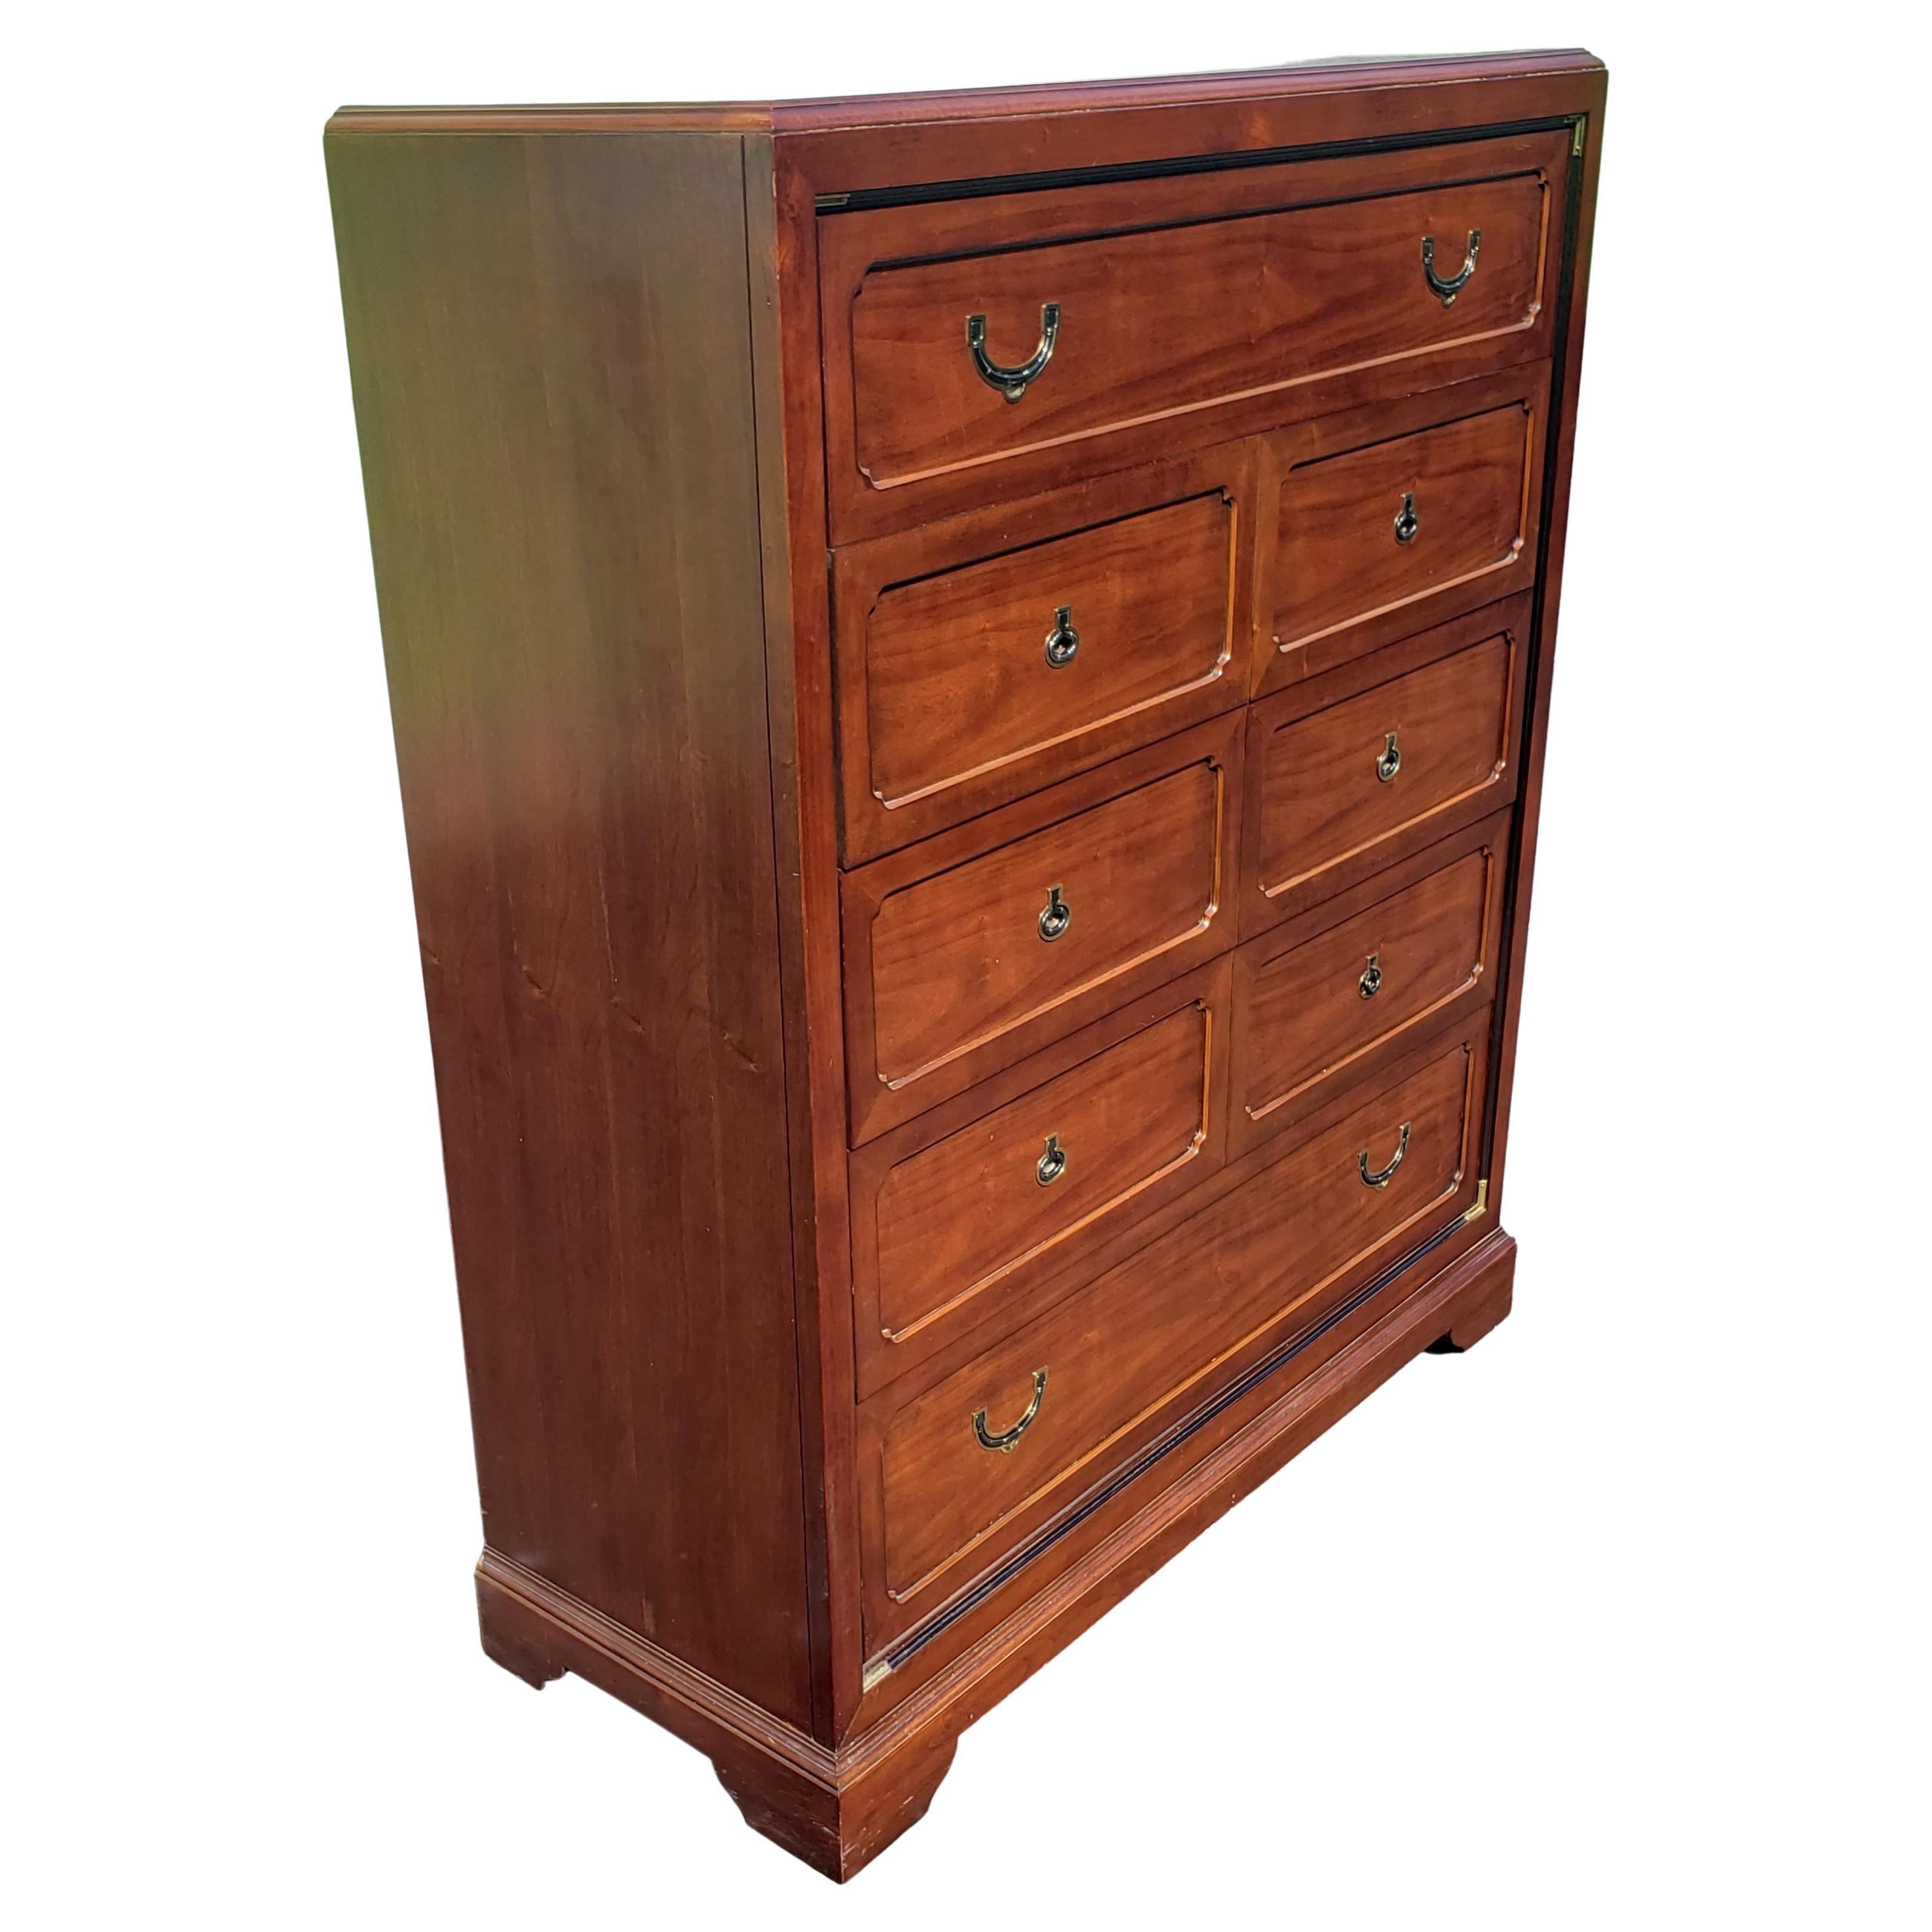 Splendid National Mt Airy campaign chest of drawers. Featuring 5 large drawers, all dovetailed and sliding as intended by the manufacturer.
Very good vintage condition. 
Measures 46